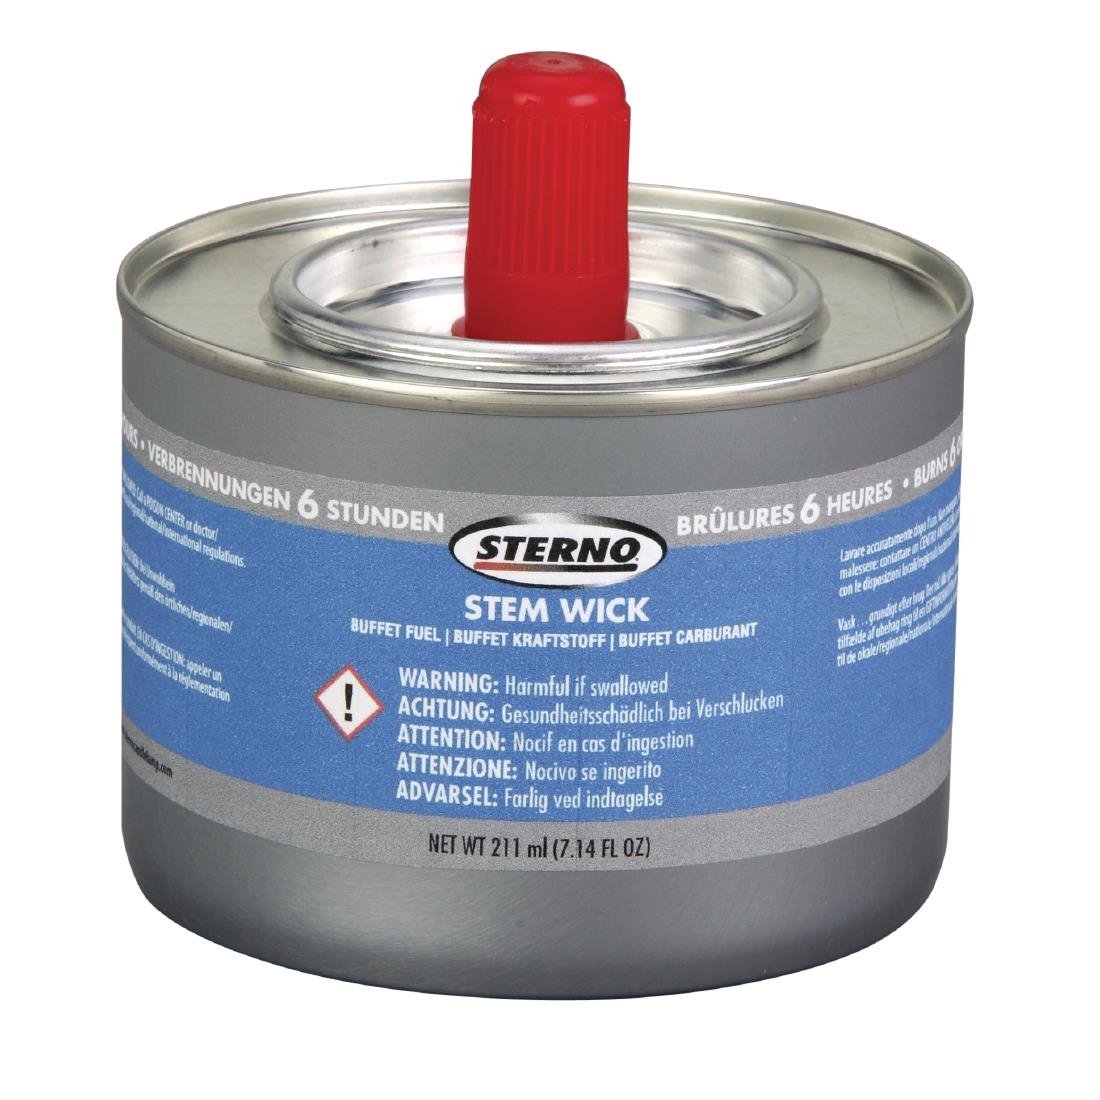 --- STERNO S899 --- Stem Wick Liquid Chafing Fuel With Wick 6 Hour - Pack of 36